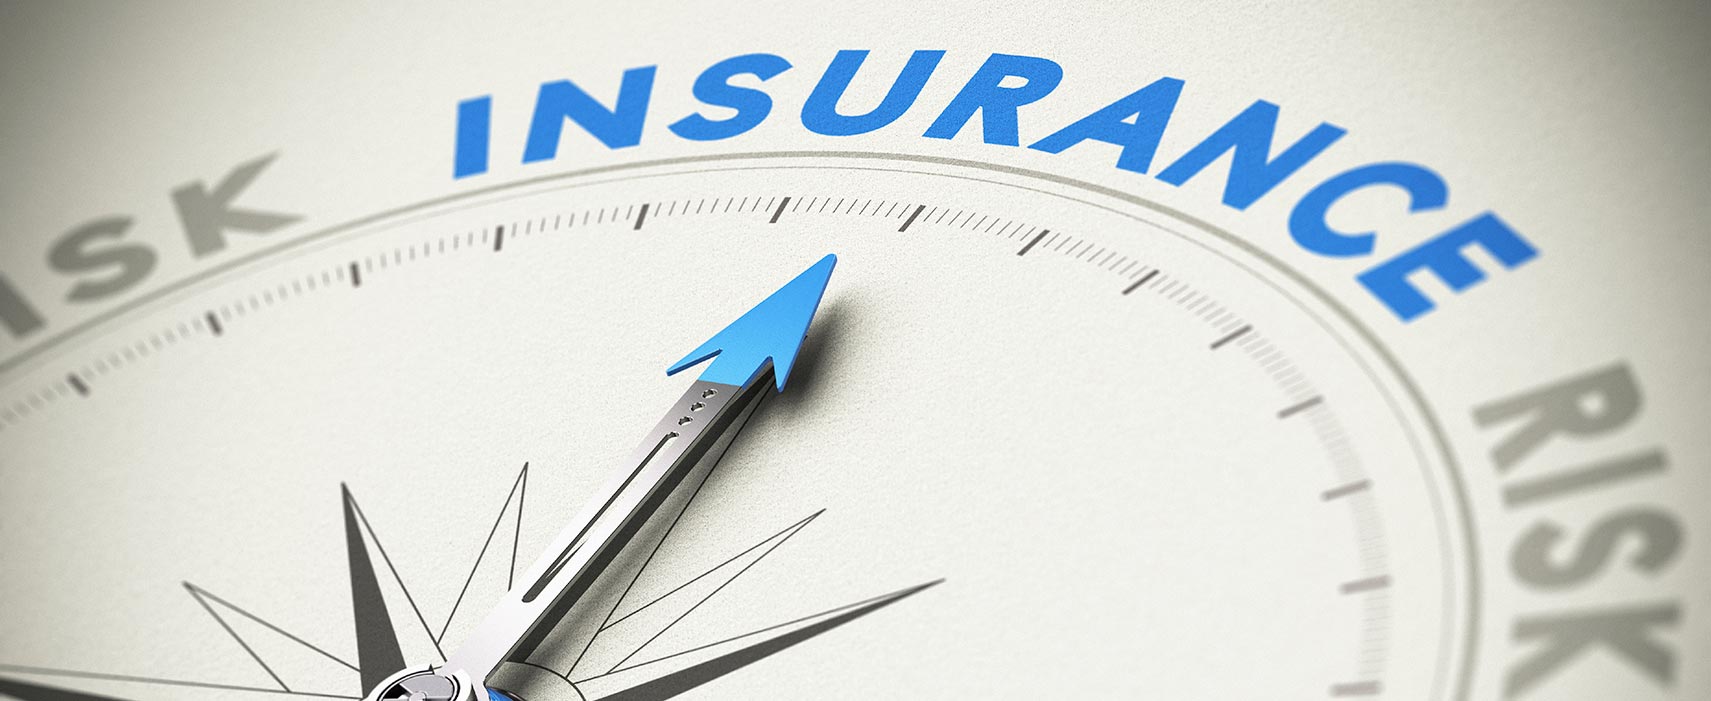 Citizens Will Have Rate Hikes … but Less Than Other Insurers